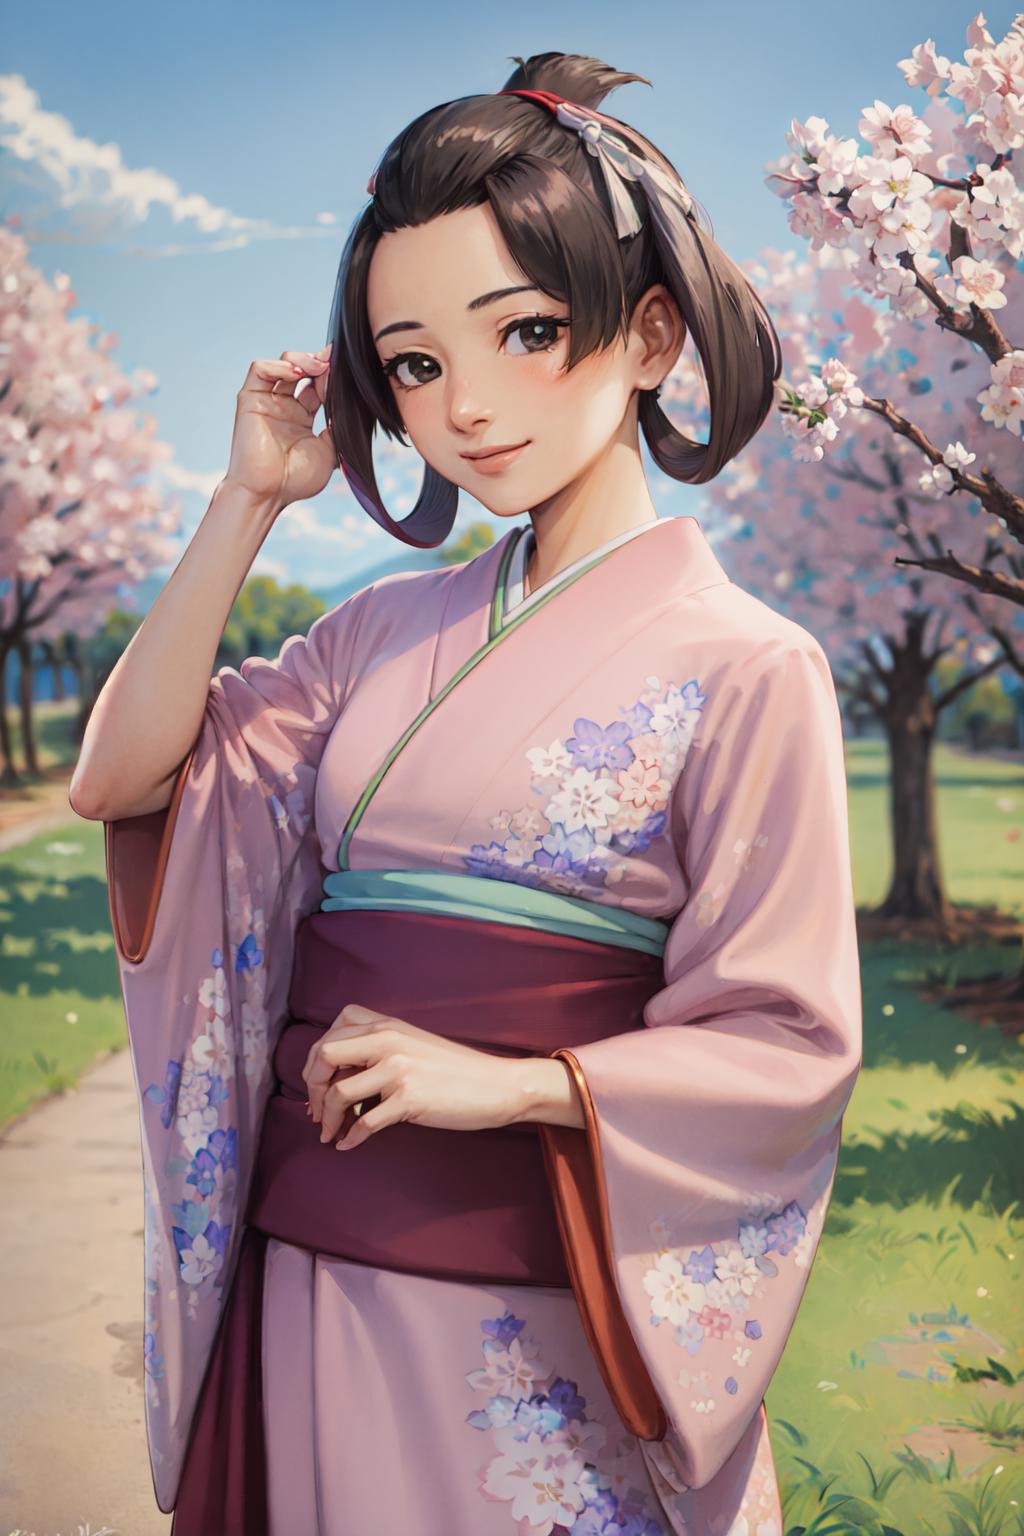 Susato Mikotoba | The Great Ace Attorney image by justTNP